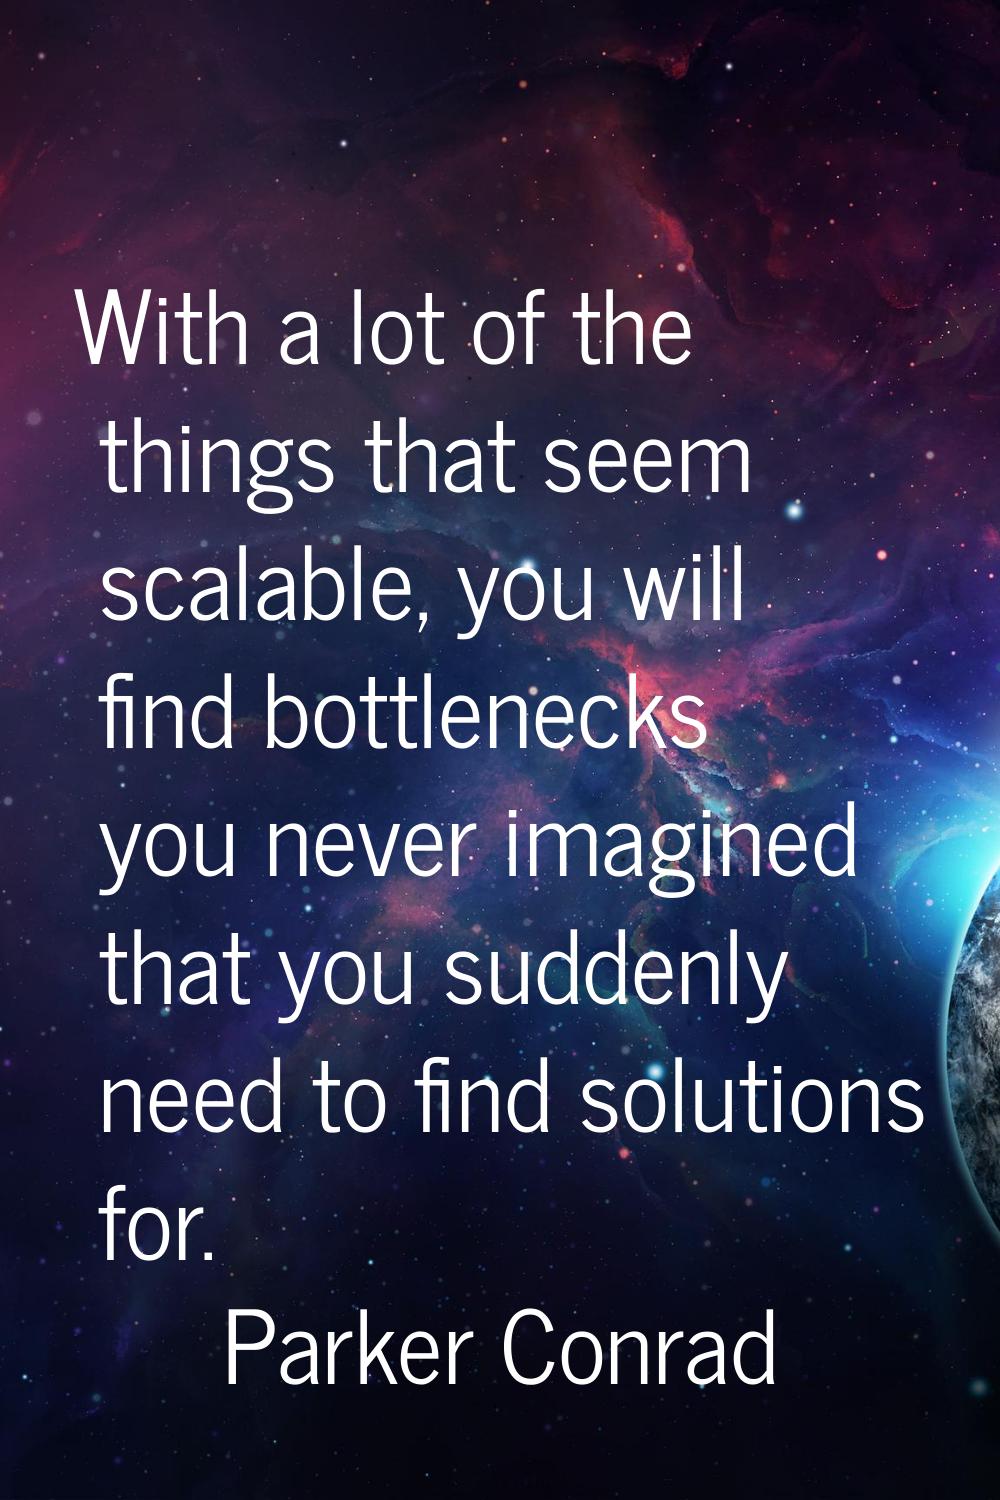 With a lot of the things that seem scalable, you will find bottlenecks you never imagined that you 